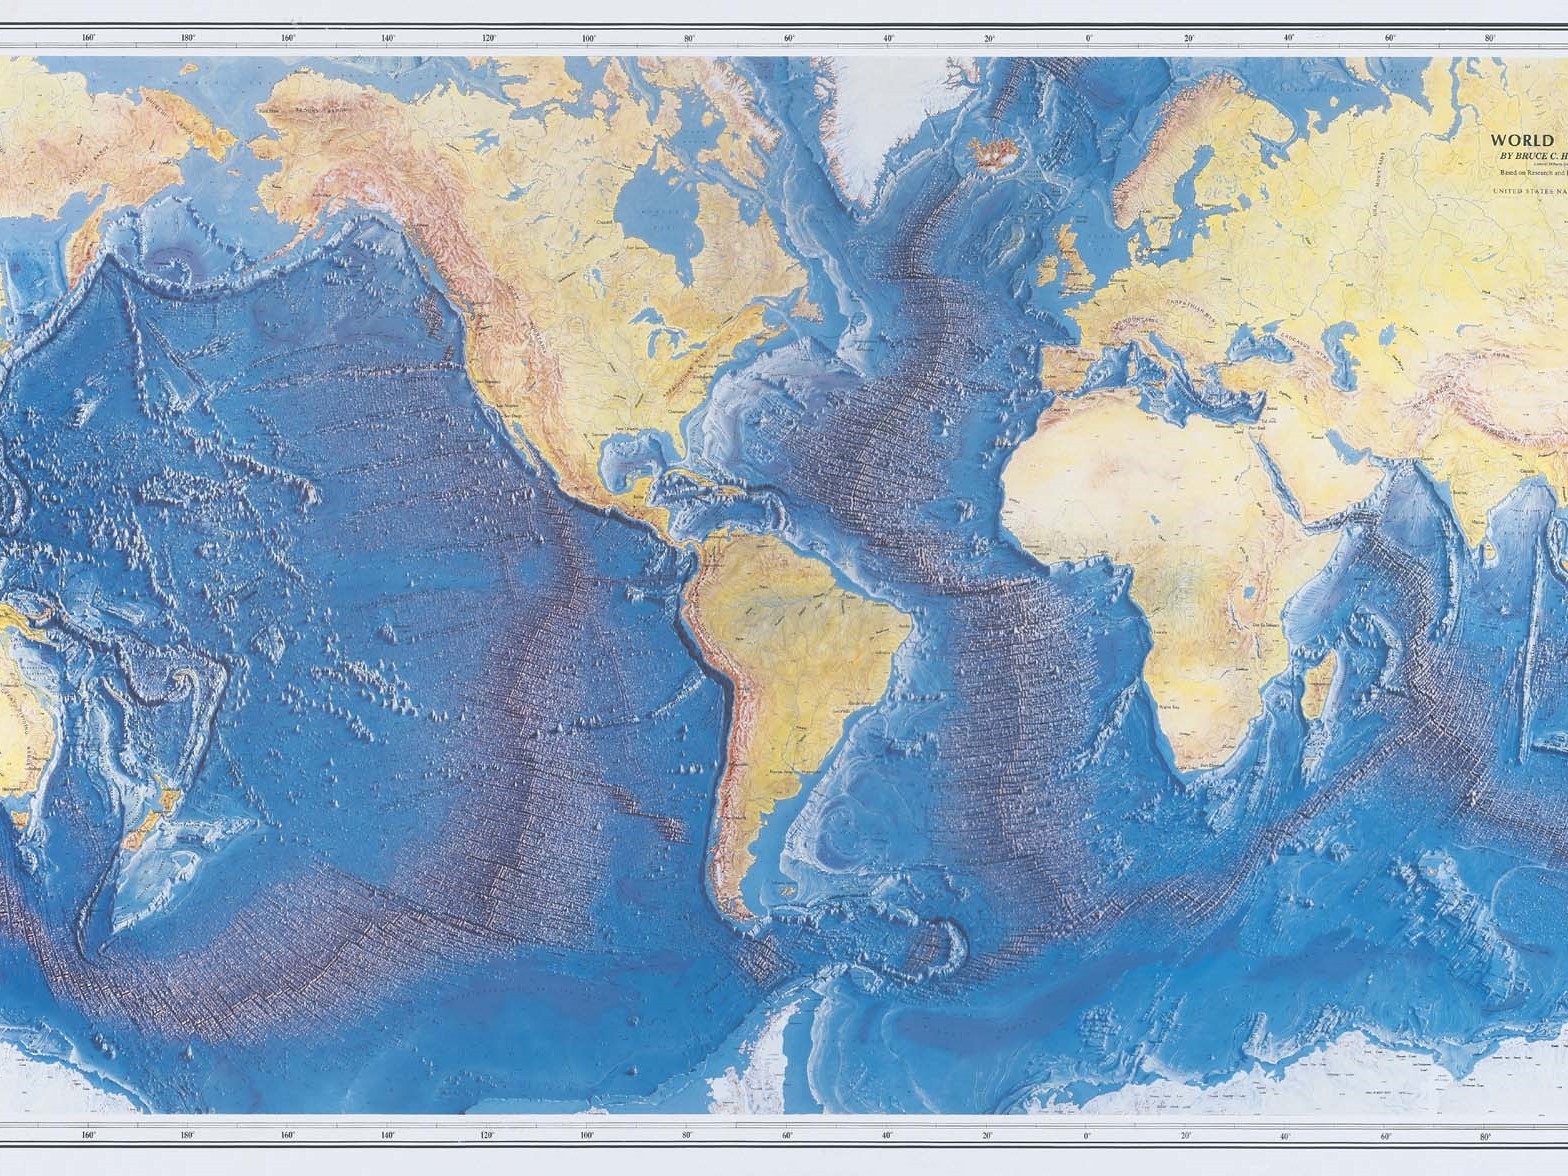 Tharp and Heezen Map of World’s Ocean Floor (1977). Used with permission from Marie Tharp Maps LLC and Lamont-Doherty Earth Observatory.